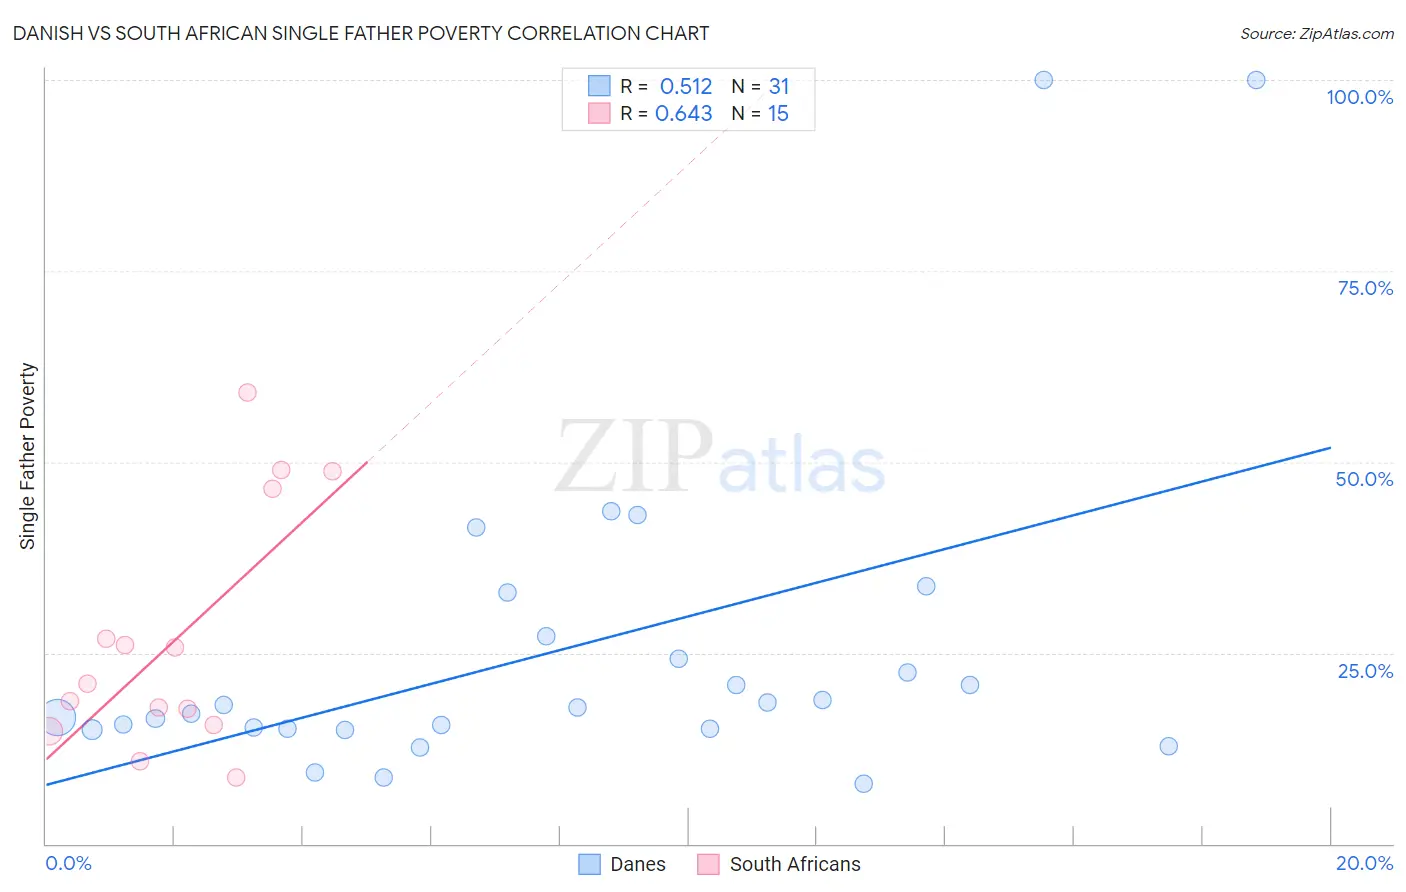 Danish vs South African Single Father Poverty